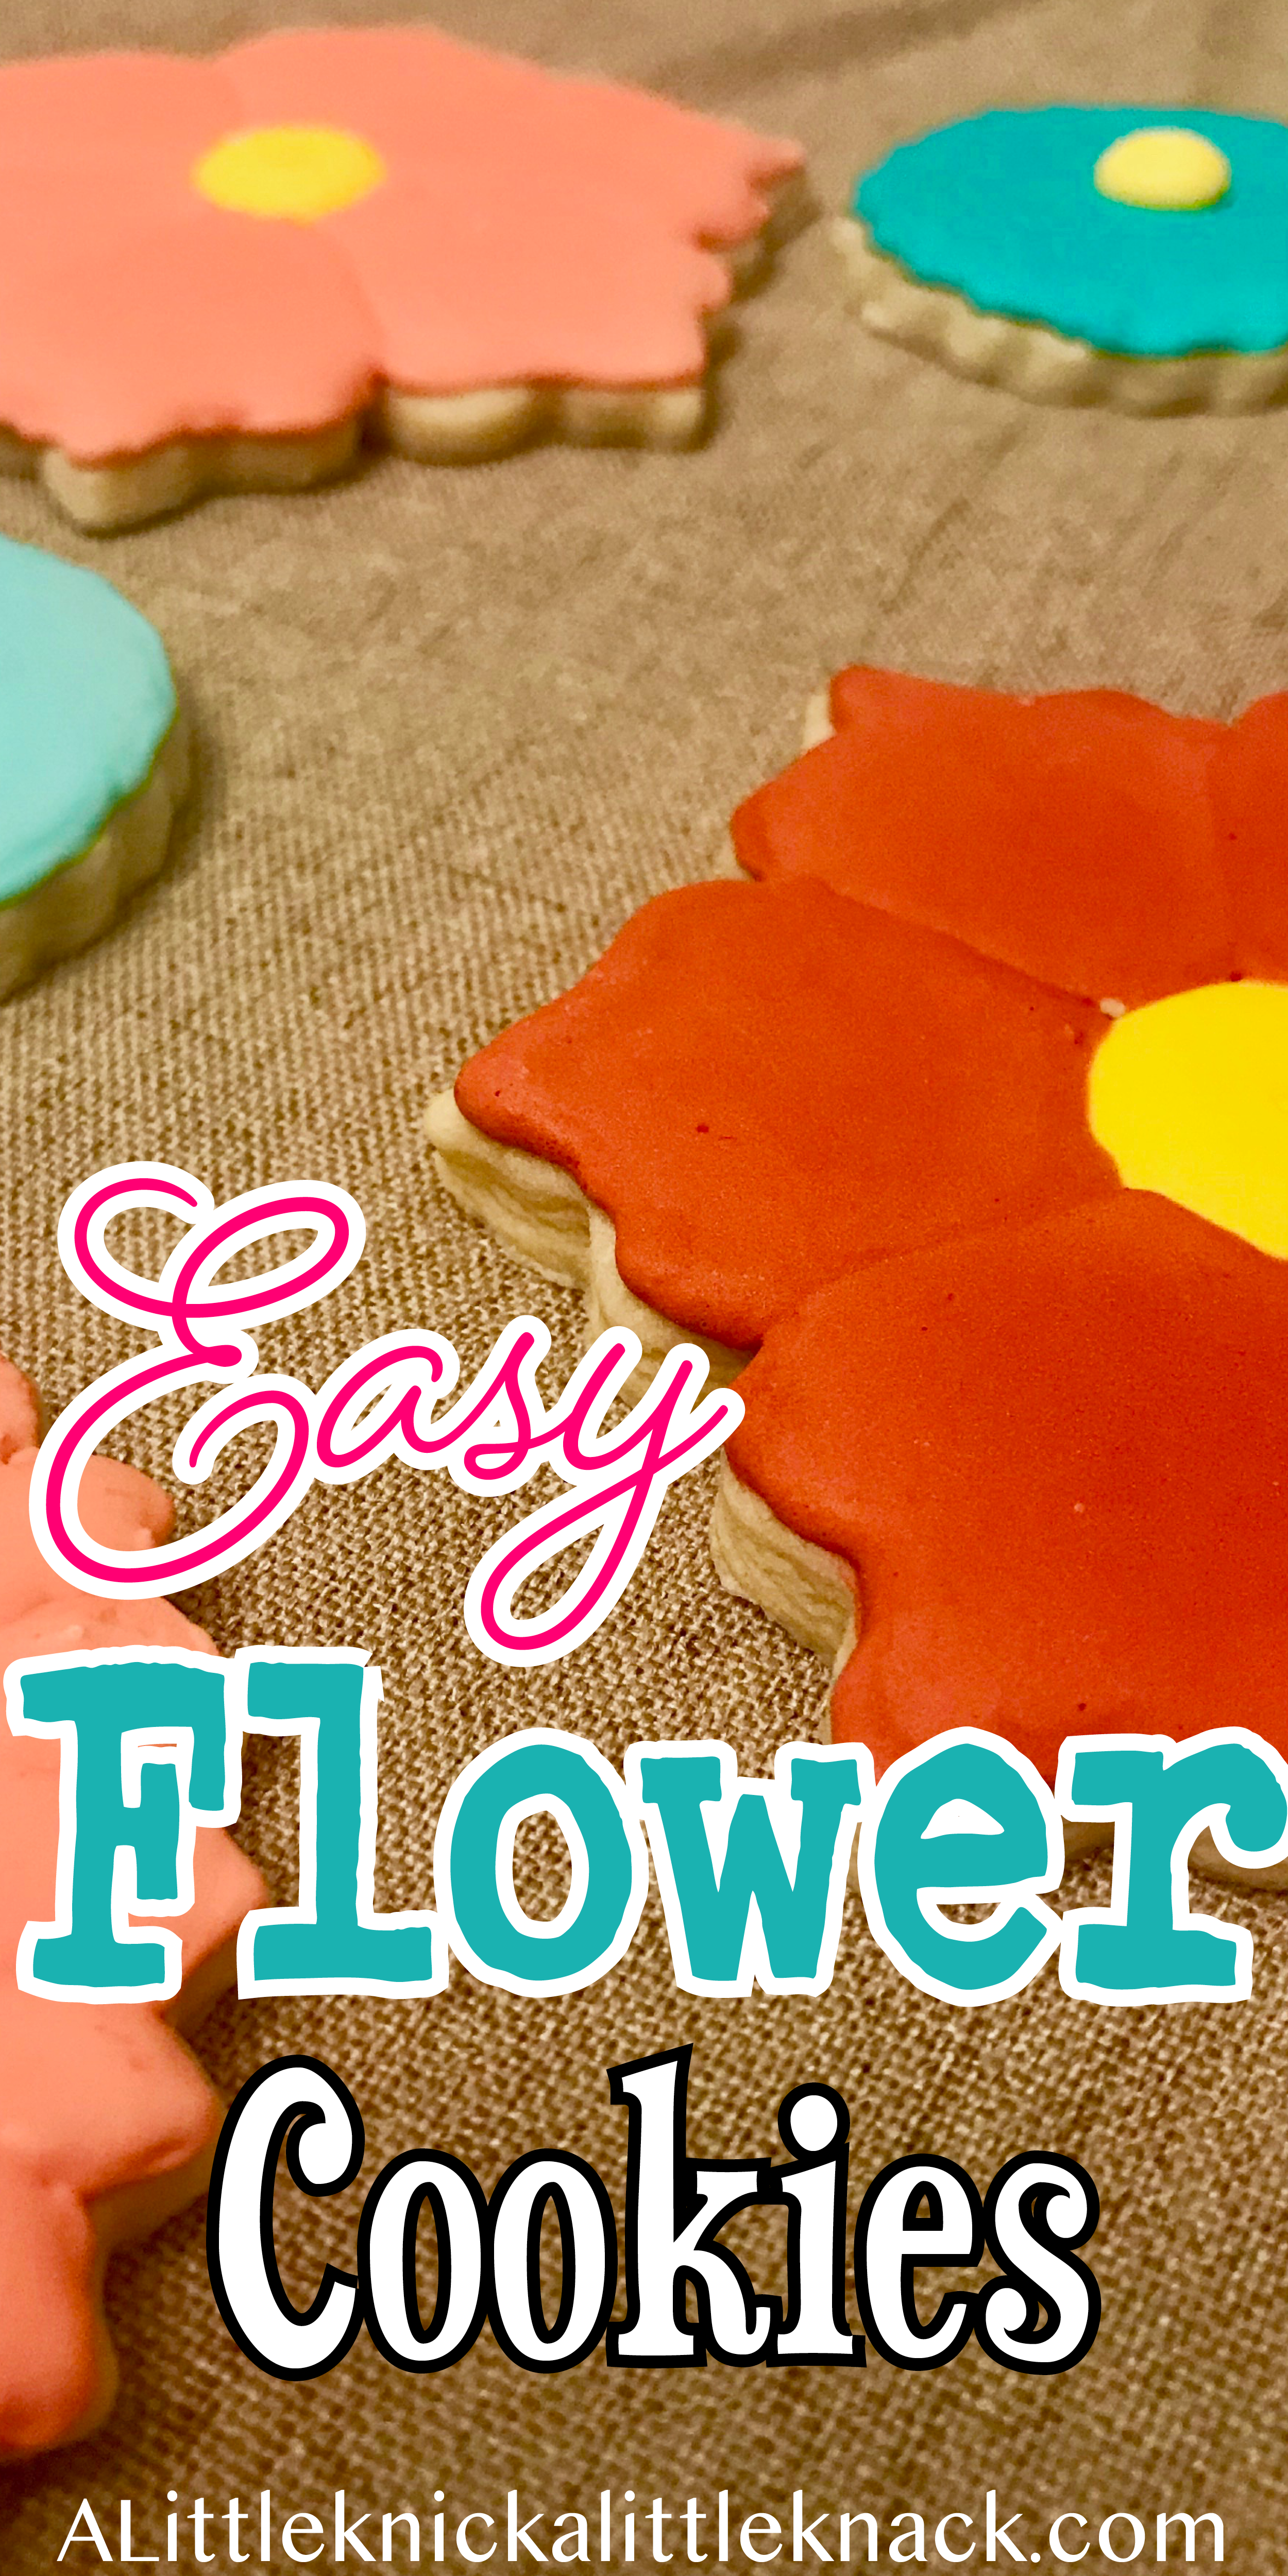 Decorated flower Cookies with a text overlay 